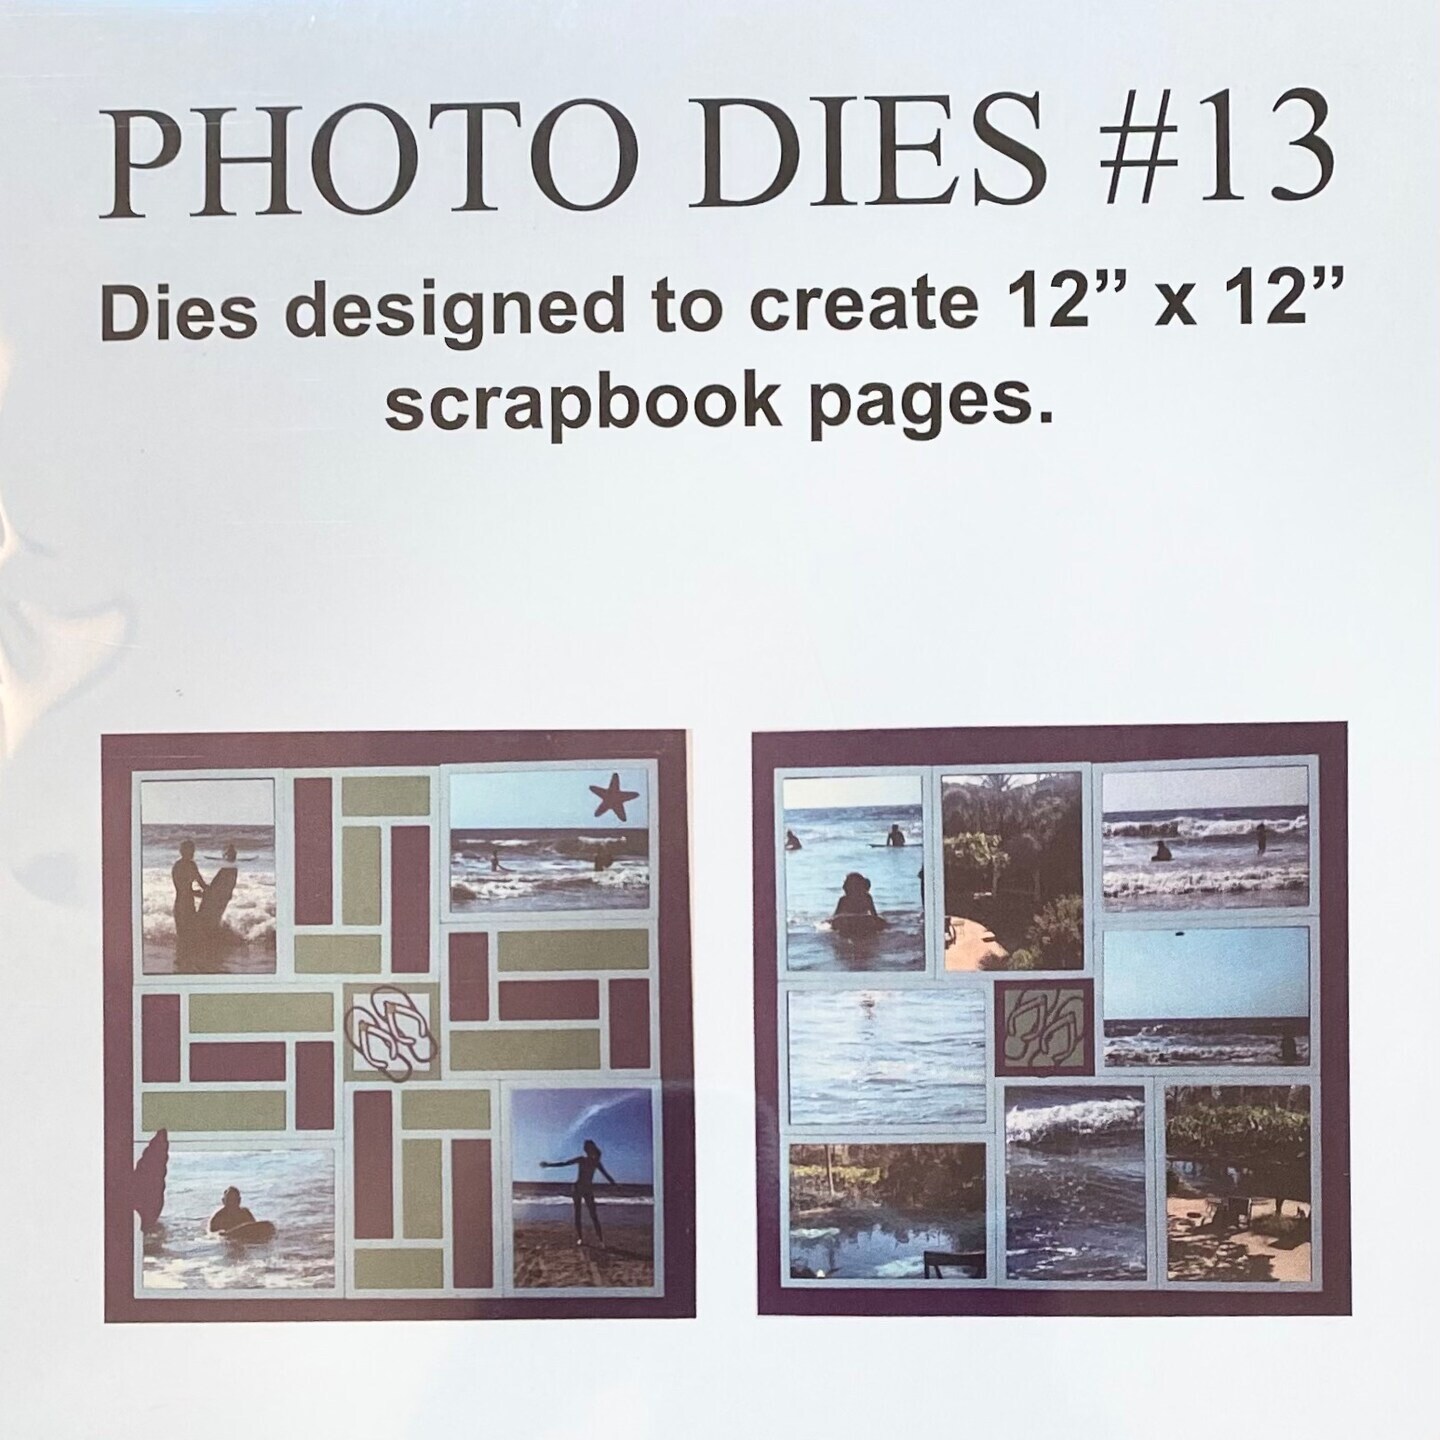 Photo Dies Kit 13 - Rectangle Dies creates a multi-color scrapbook layout with ease.